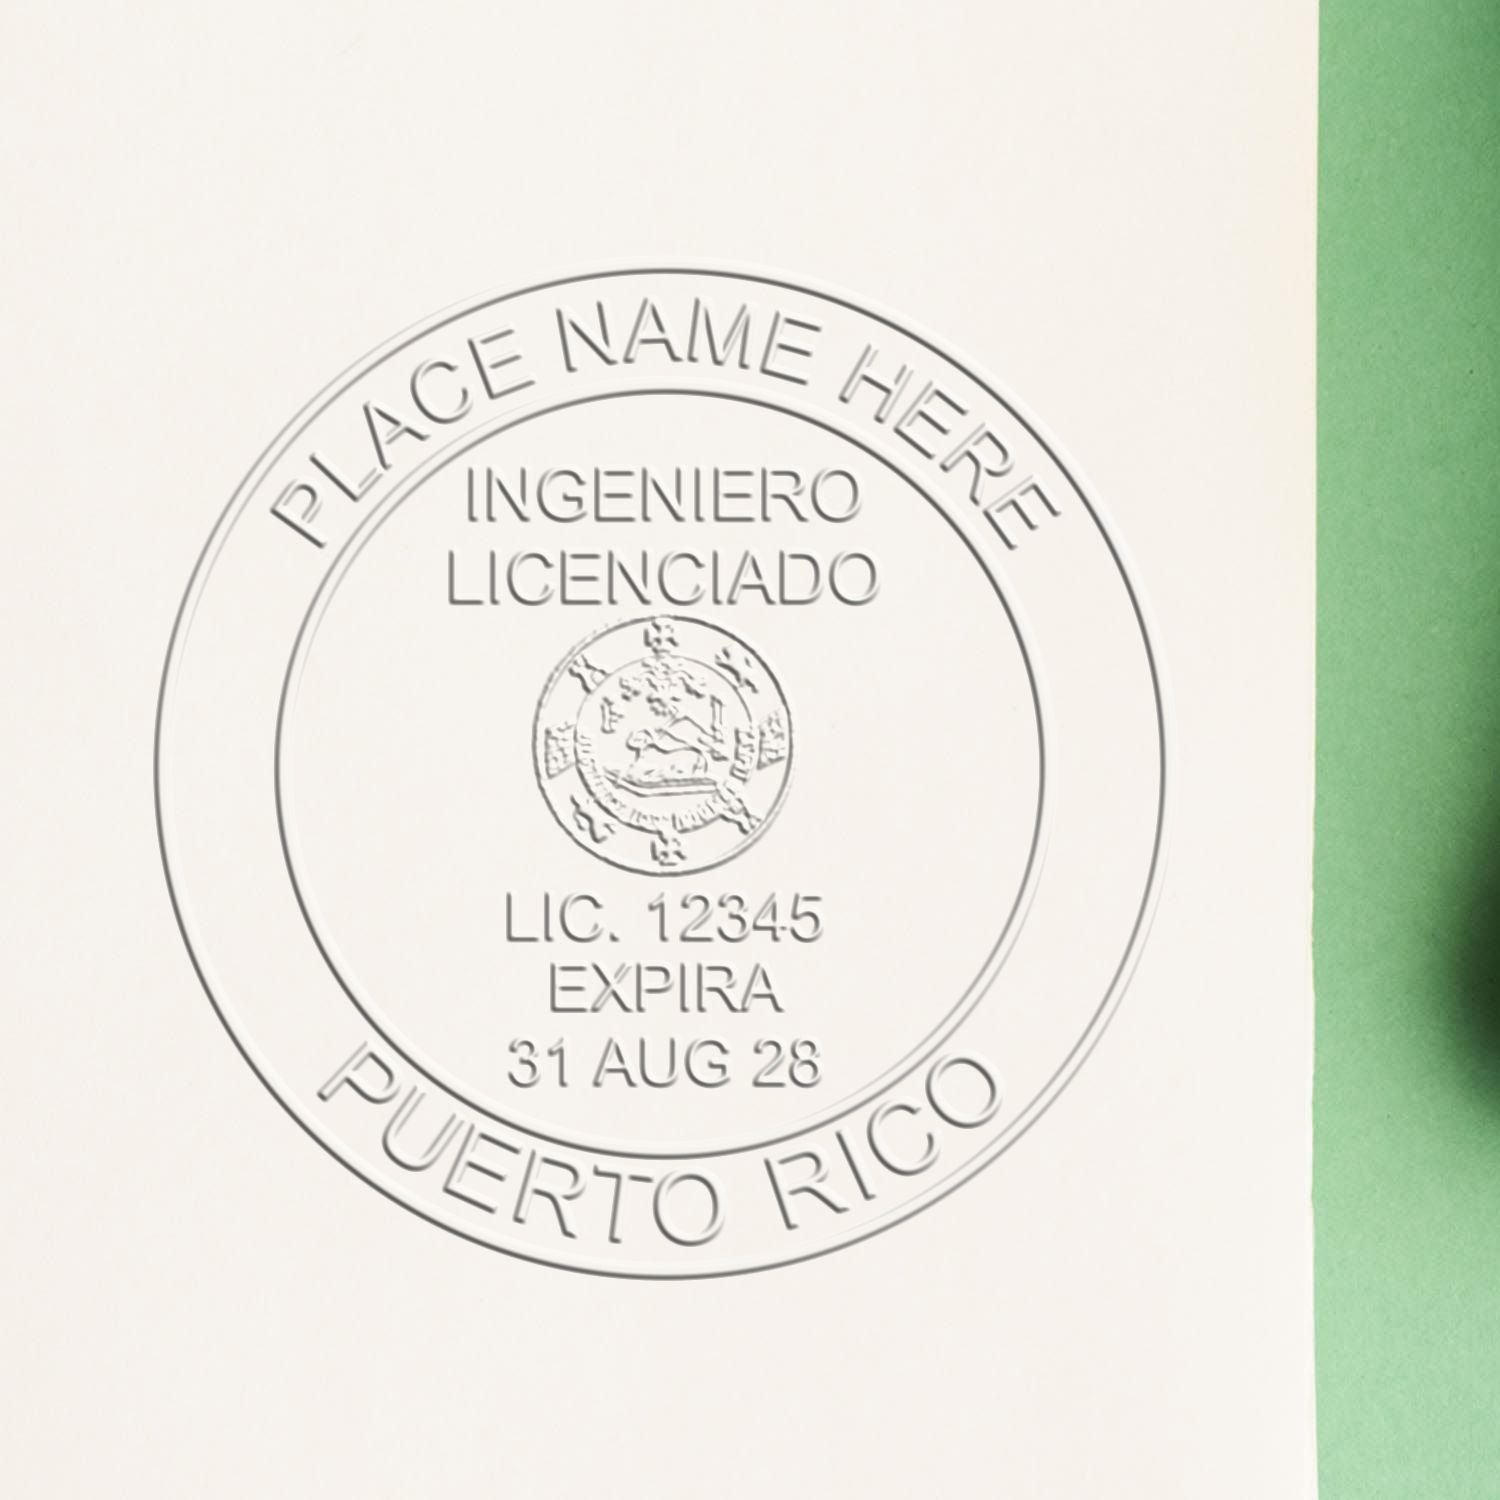 A stamped impression of the Soft Puerto Rico Professional Engineer Seal in this stylish lifestyle photo, setting the tone for a unique and personalized product.